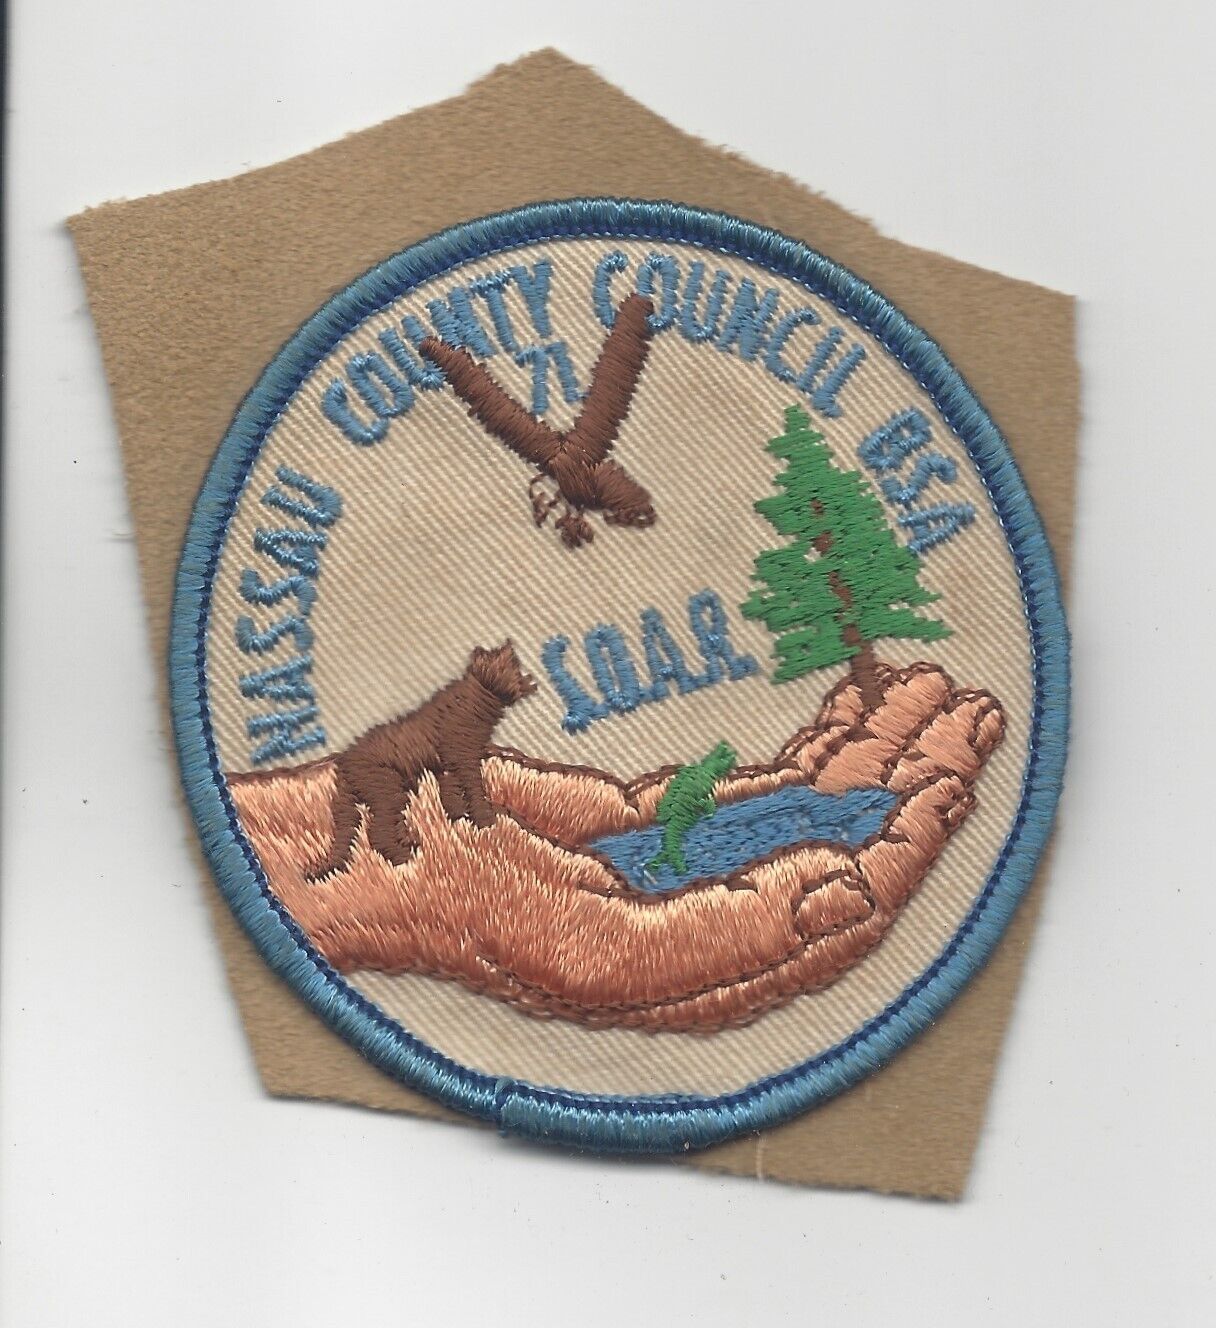 1971 Project SOAR Nassau County Council Boy Scouts of America BSA on suede leath